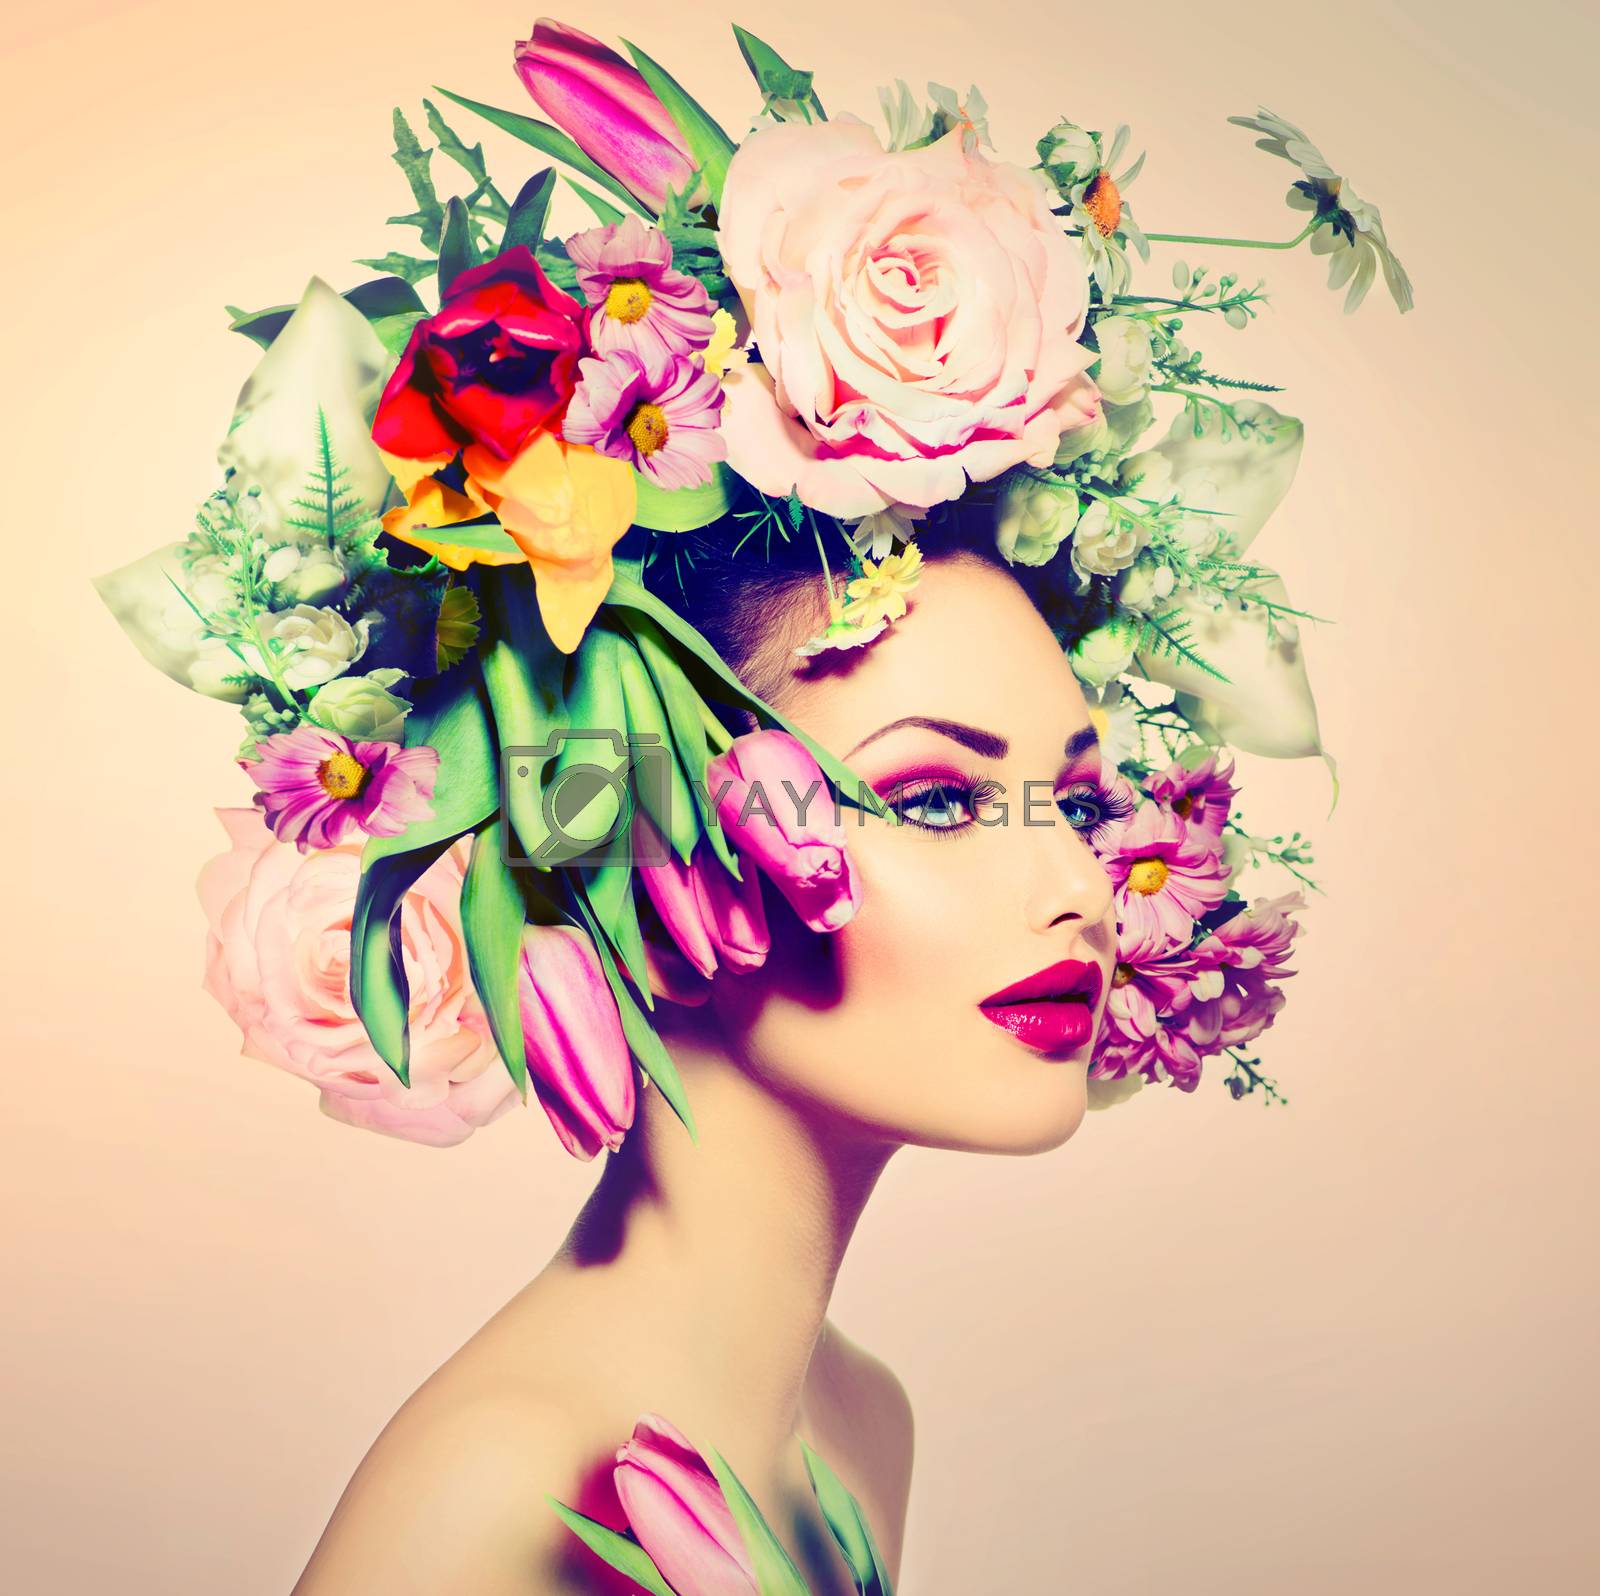 Royalty free image of Spring Woman. Beauty Girl with Flowers Hair Style by SubbotinaA